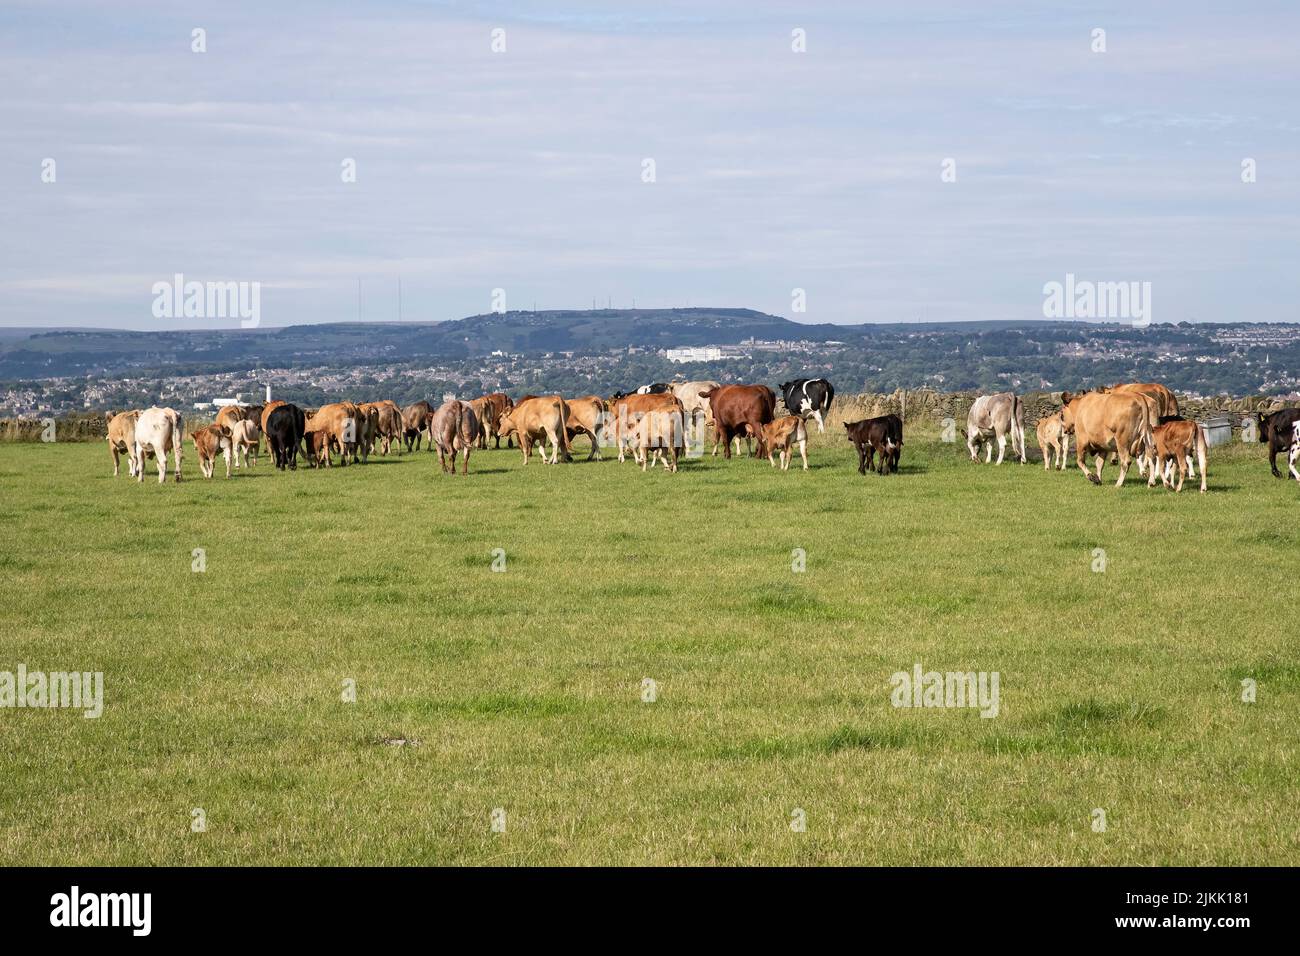 A herd of cattle being moved into a new field of fresh pasture in summer on the uplands of Huddersfield in West Yorkshire, U.K. Stock Photo